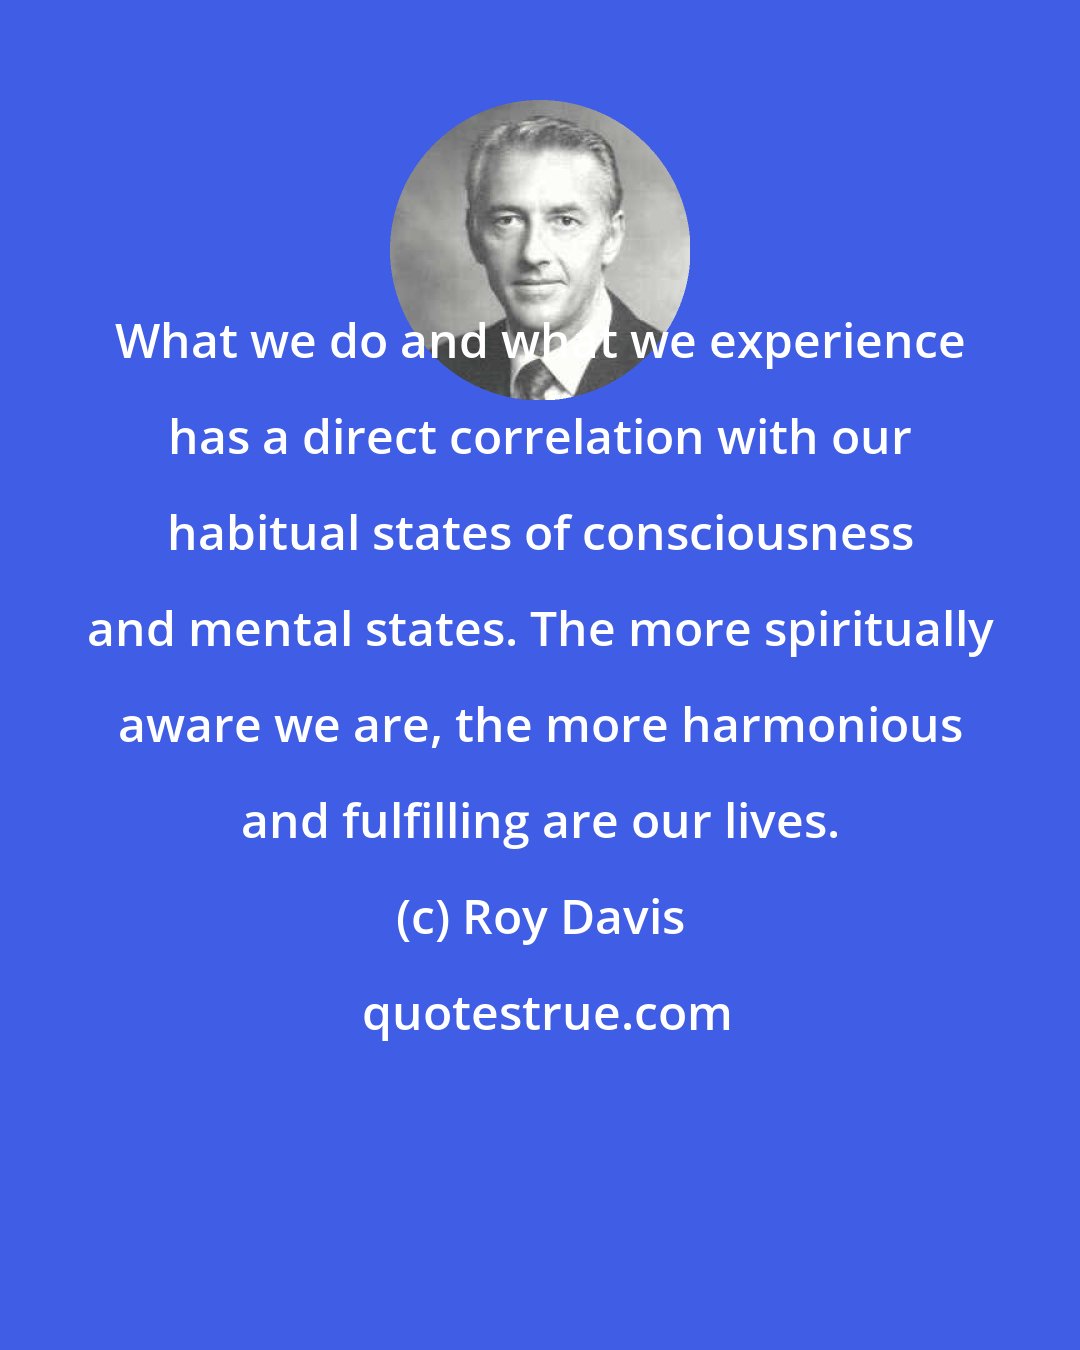 Roy Davis: What we do and what we experience has a direct correlation with our habitual states of consciousness and mental states. The more spiritually aware we are, the more harmonious and fulfilling are our lives.